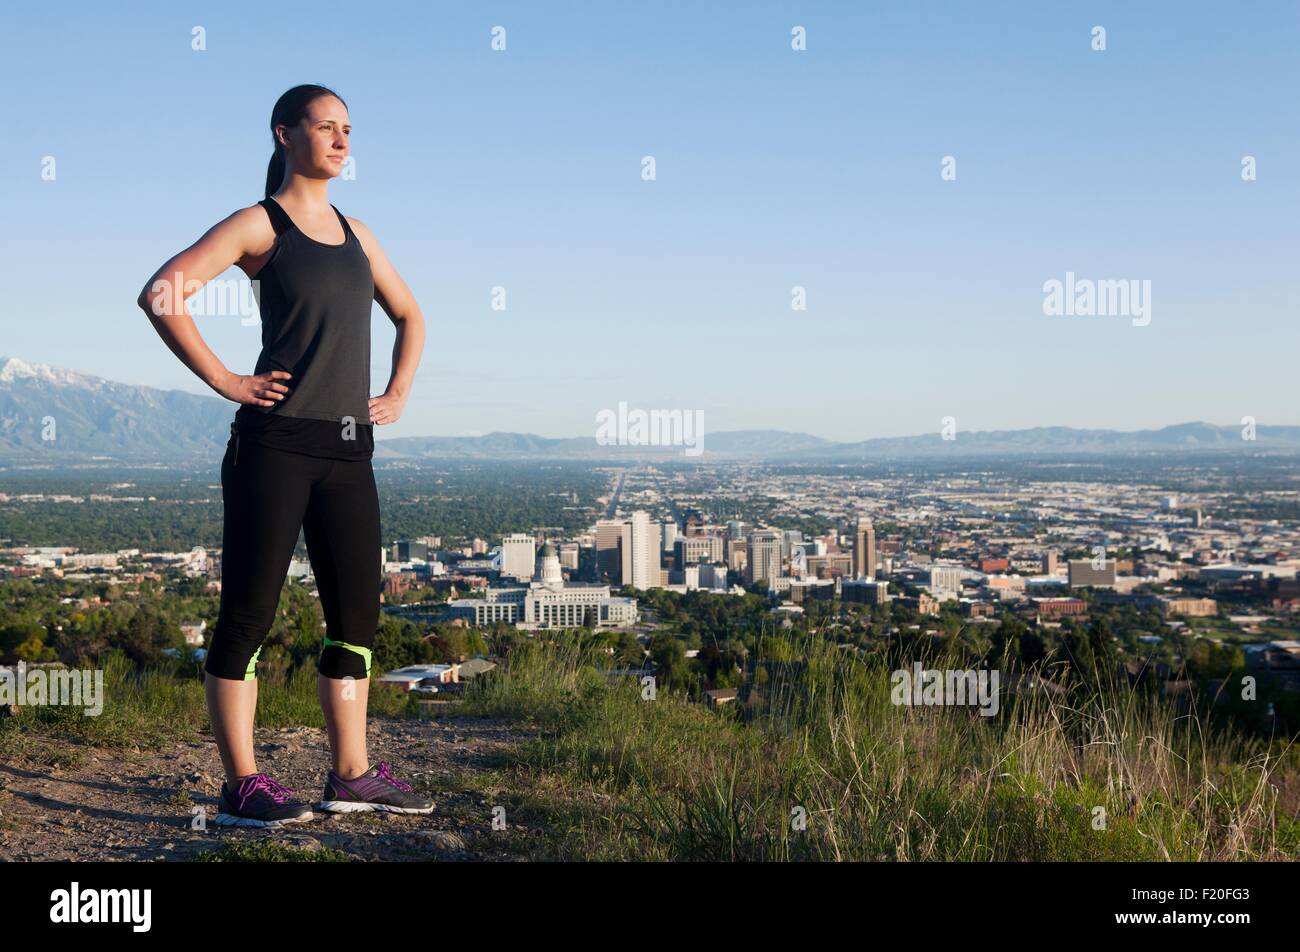 Portrait of young female runner on dirt track above city in valley Stock Photo